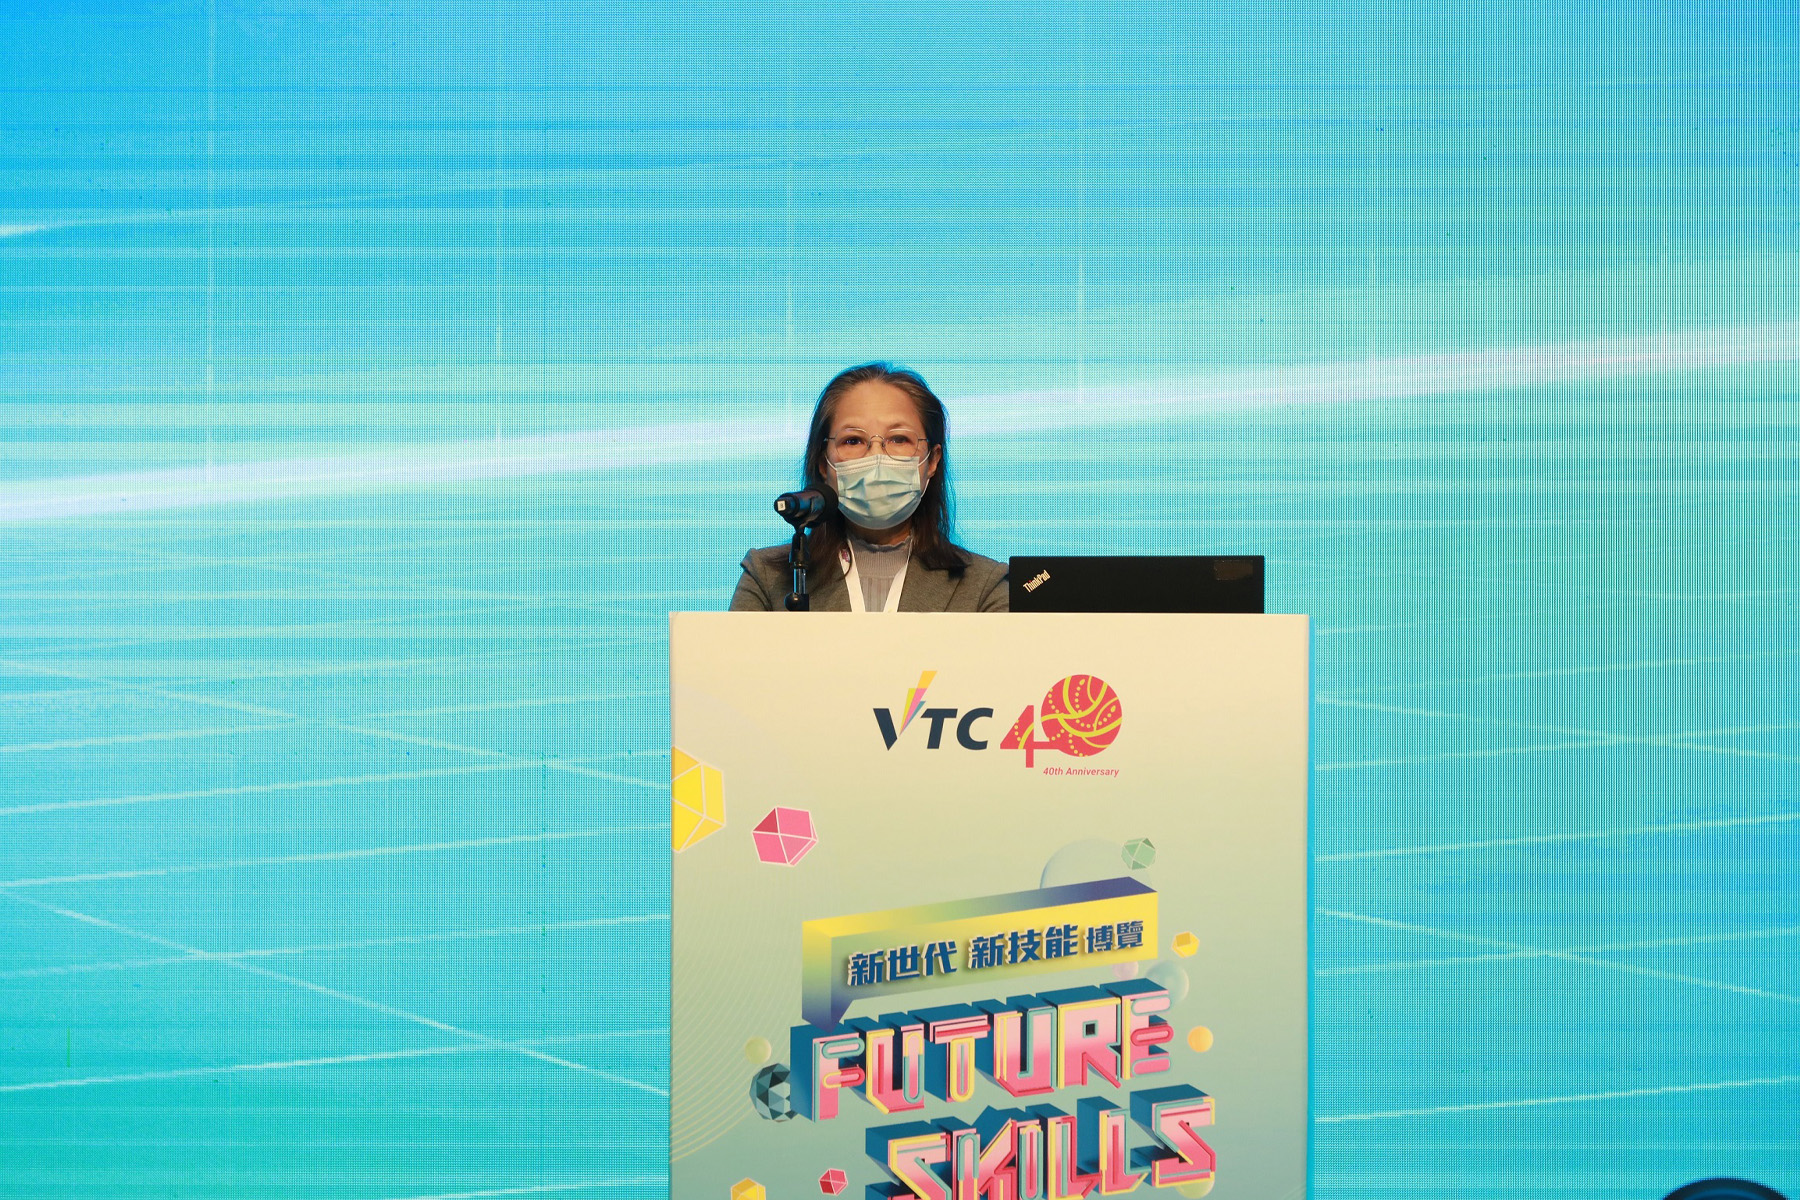 Speaking at the “Roadmap to Carbon Neutrality in VTC” seminar yesterday, the Under Secretary for Environment and Ecology, Miss Diane WONG, stated that Hong Kong would strive to achieve carbon neutrality before 2050 and reduce the city's total carbon emissions from the 2005 level by half before 2035